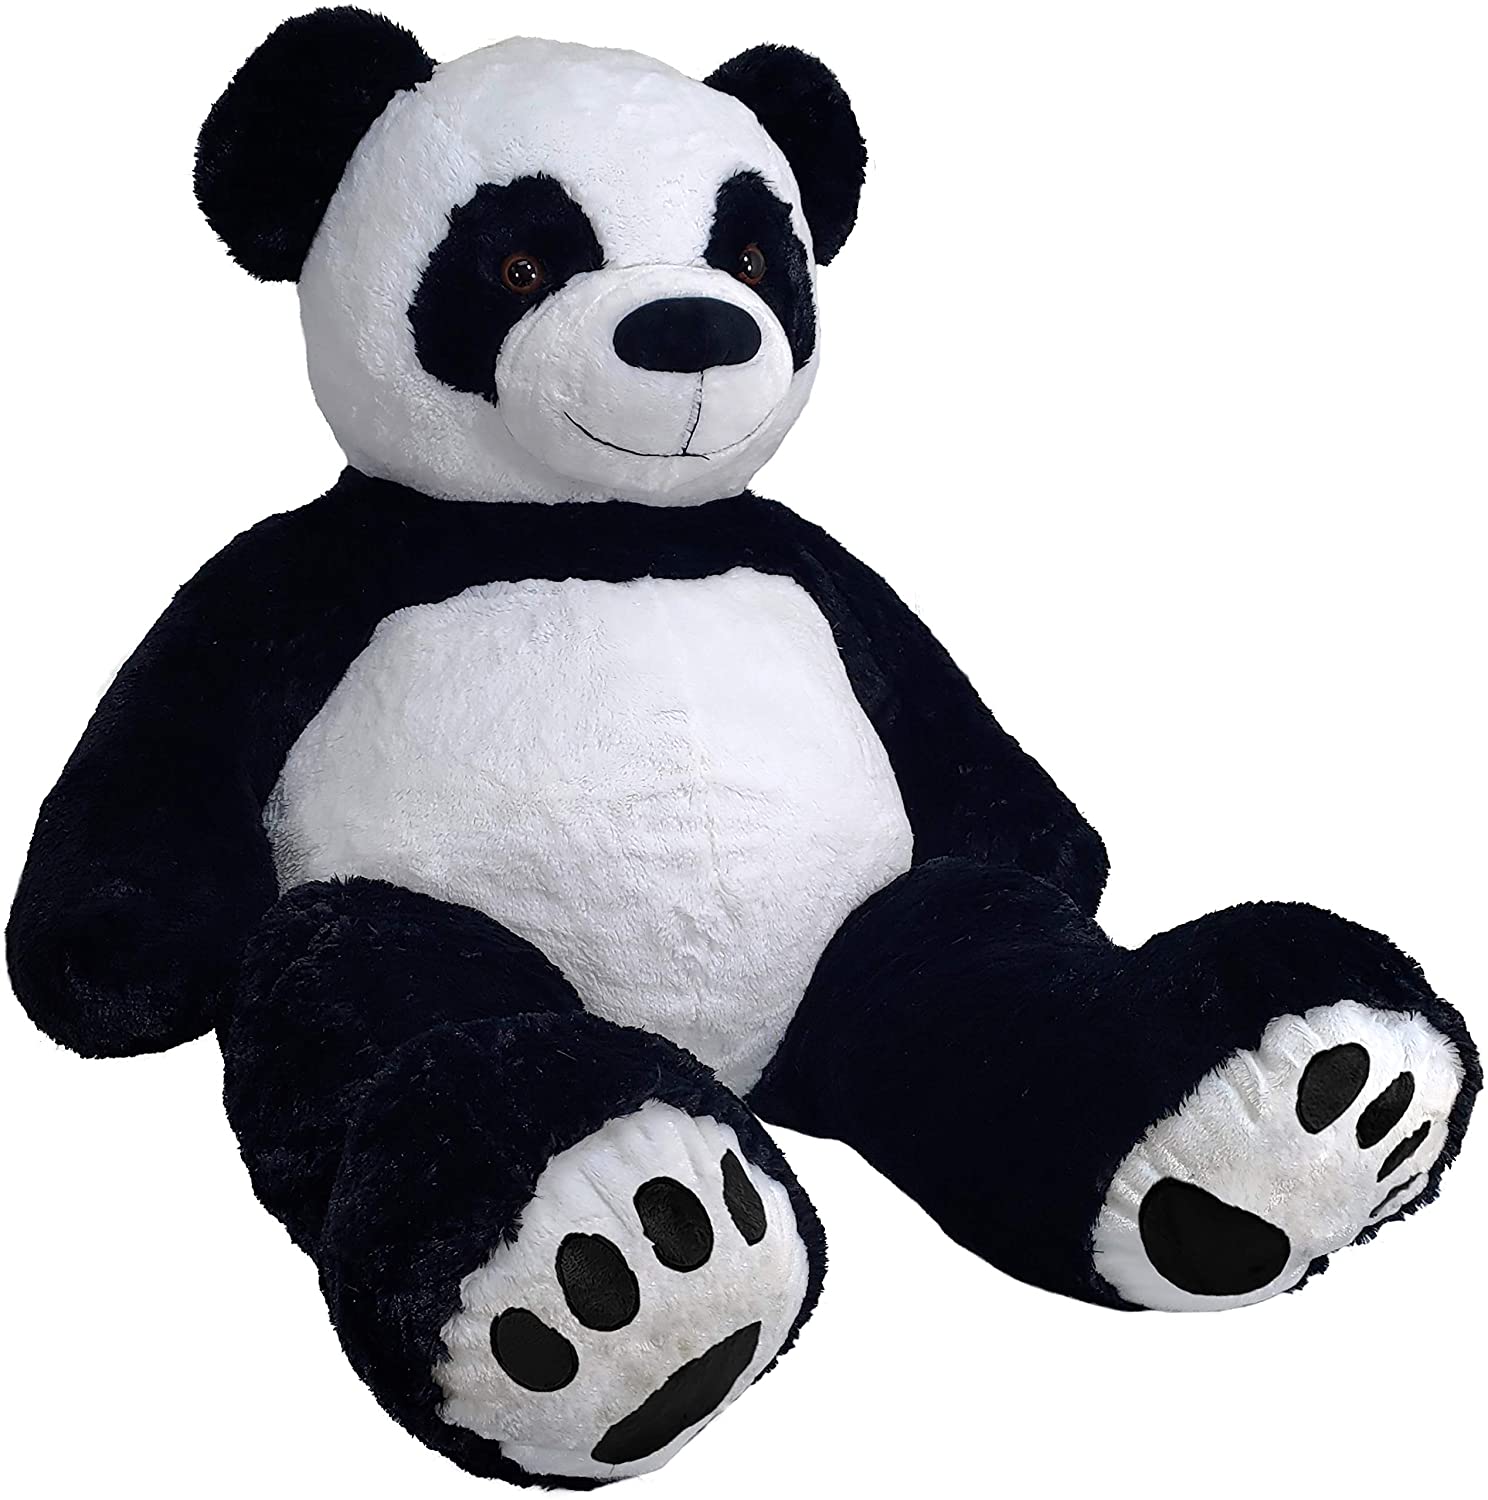 Lovey Dovey Imported Panda High Quality Huggable Birthday Gifts/Special  Surprise Gift for girls - 152 cm - Imported Panda High Quality Huggable  Birthday Gifts/Special Surprise Gift for girls . Buy Panda toys